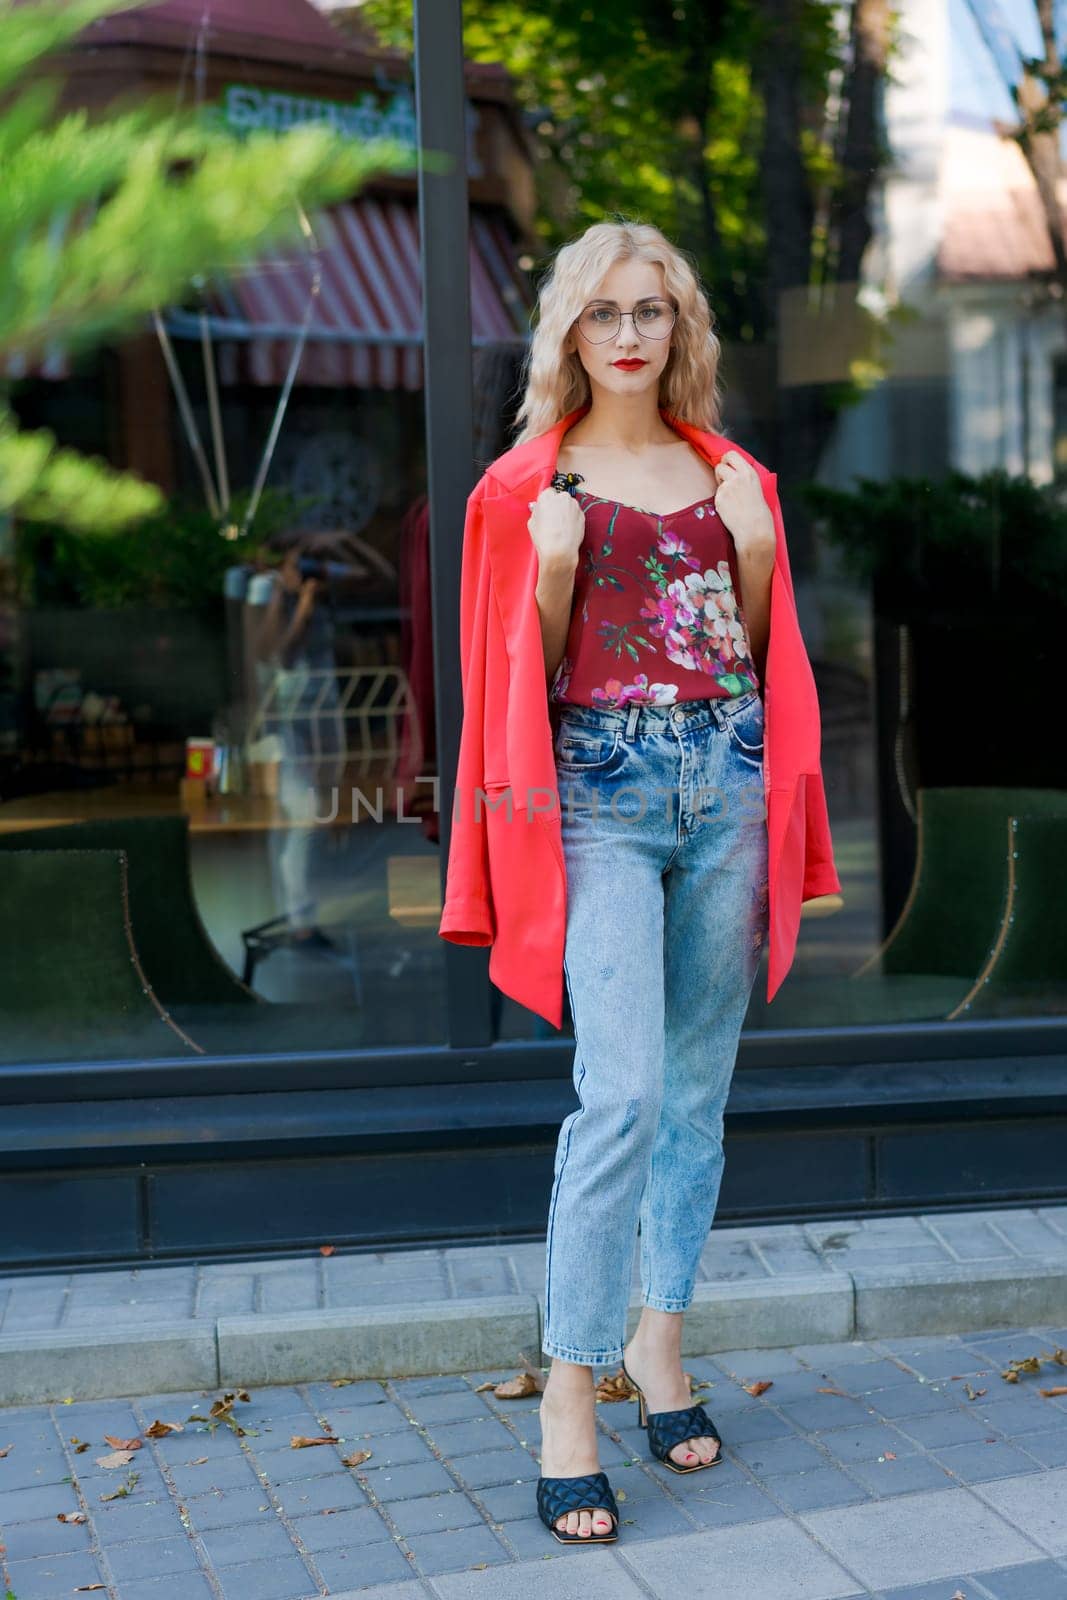 beautiful blonde woman in glasses dressed in red jacket and blue jeans posing on street in the city